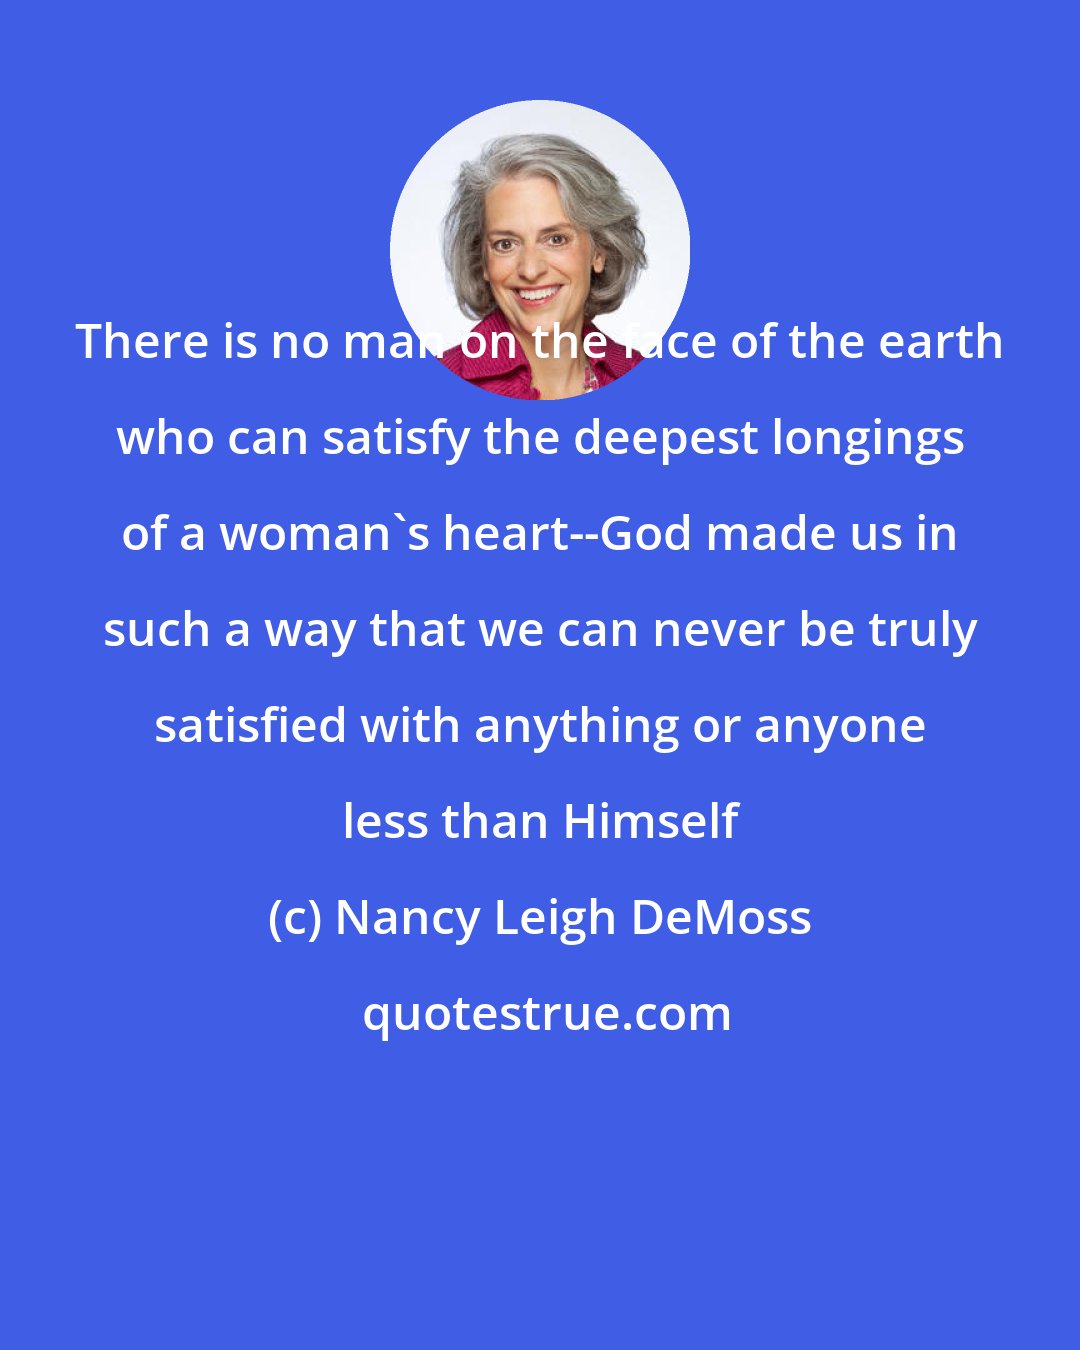 Nancy Leigh DeMoss: There is no man on the face of the earth who can satisfy the deepest longings of a woman's heart--God made us in such a way that we can never be truly satisfied with anything or anyone less than Himself